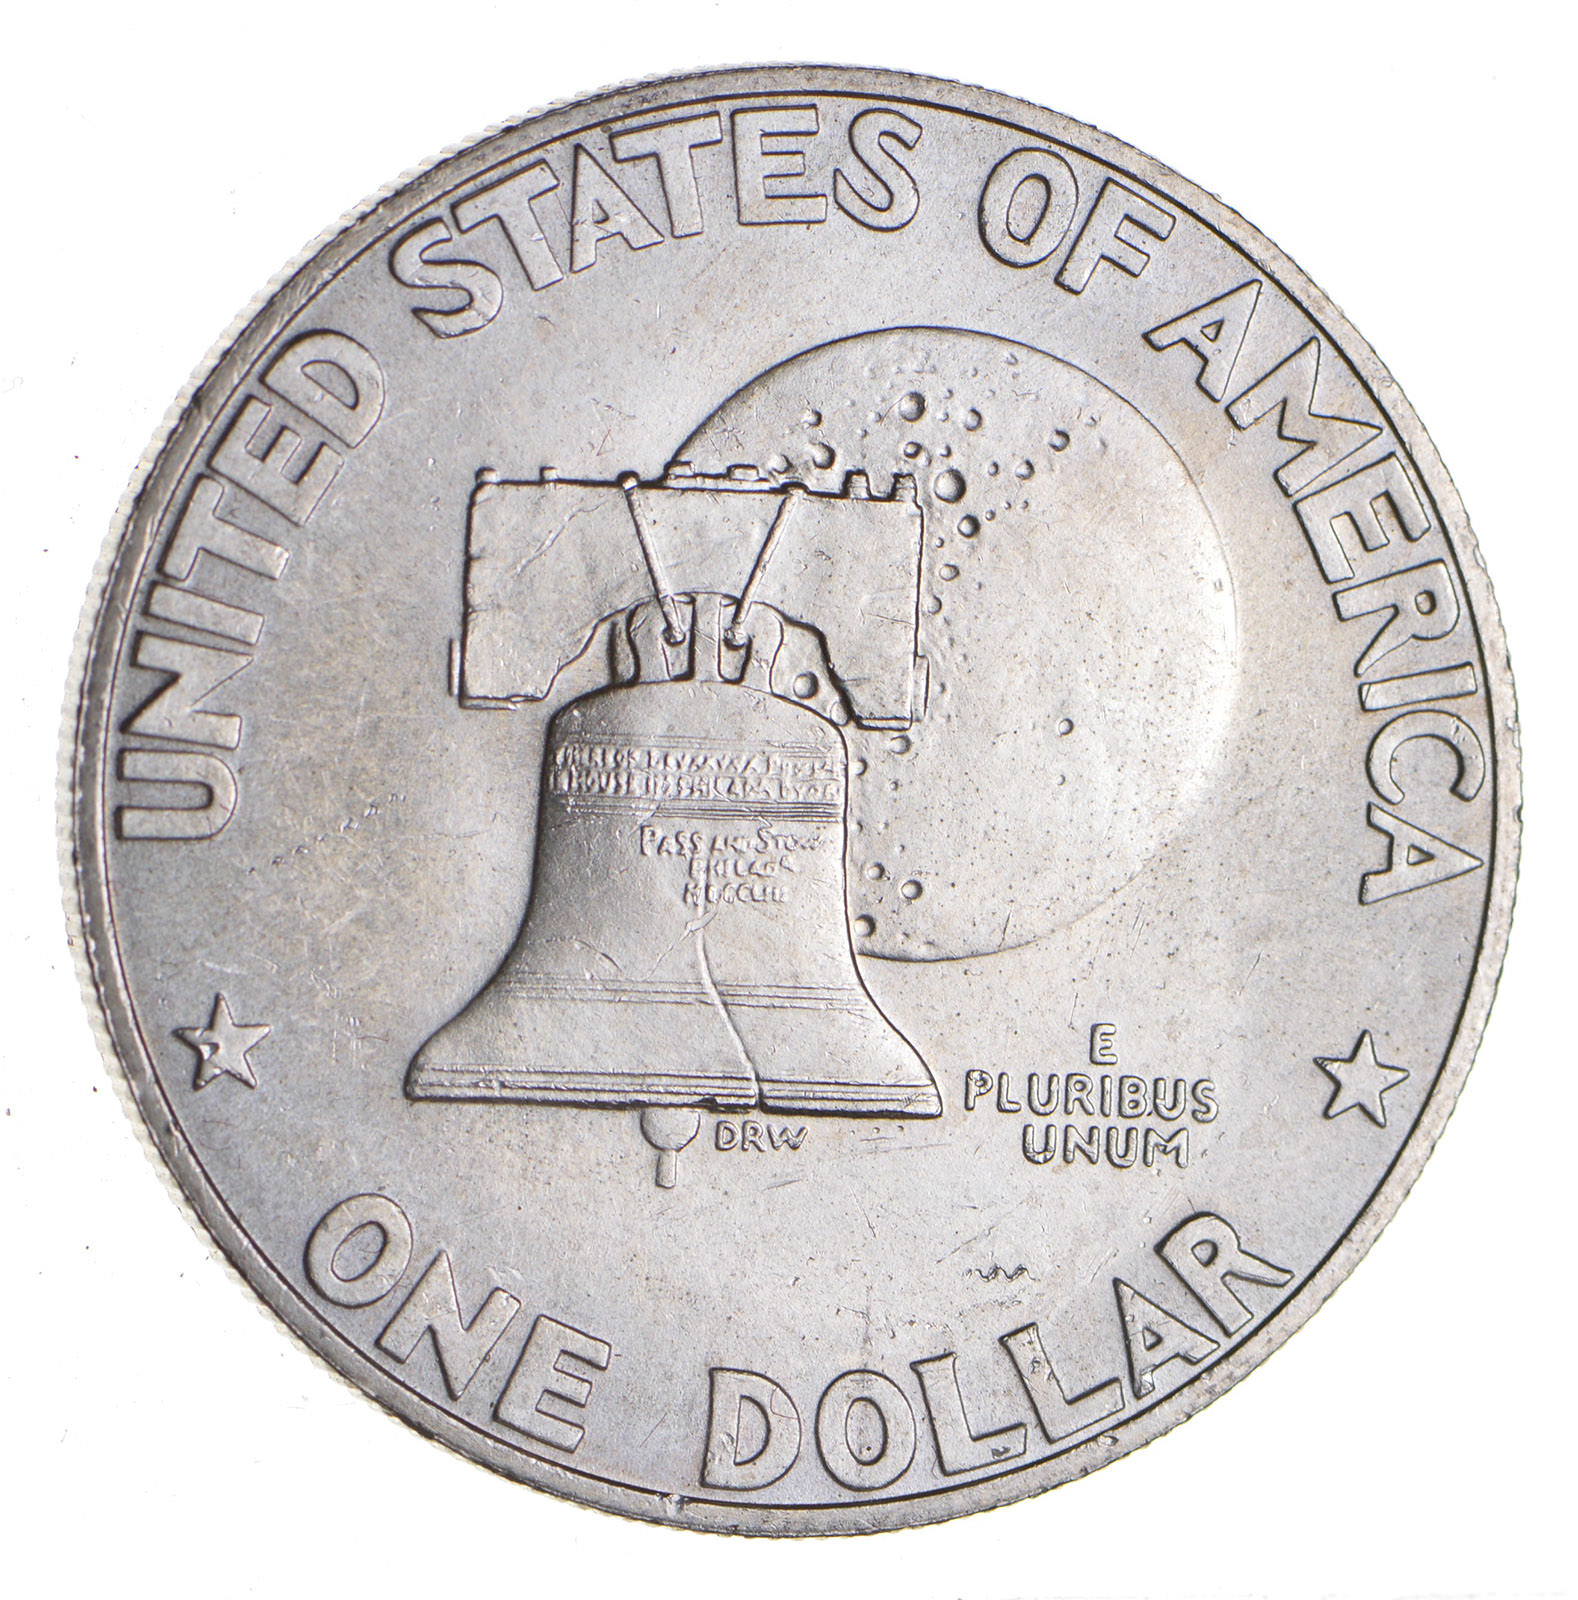 1972 to 1976 silver dollar value